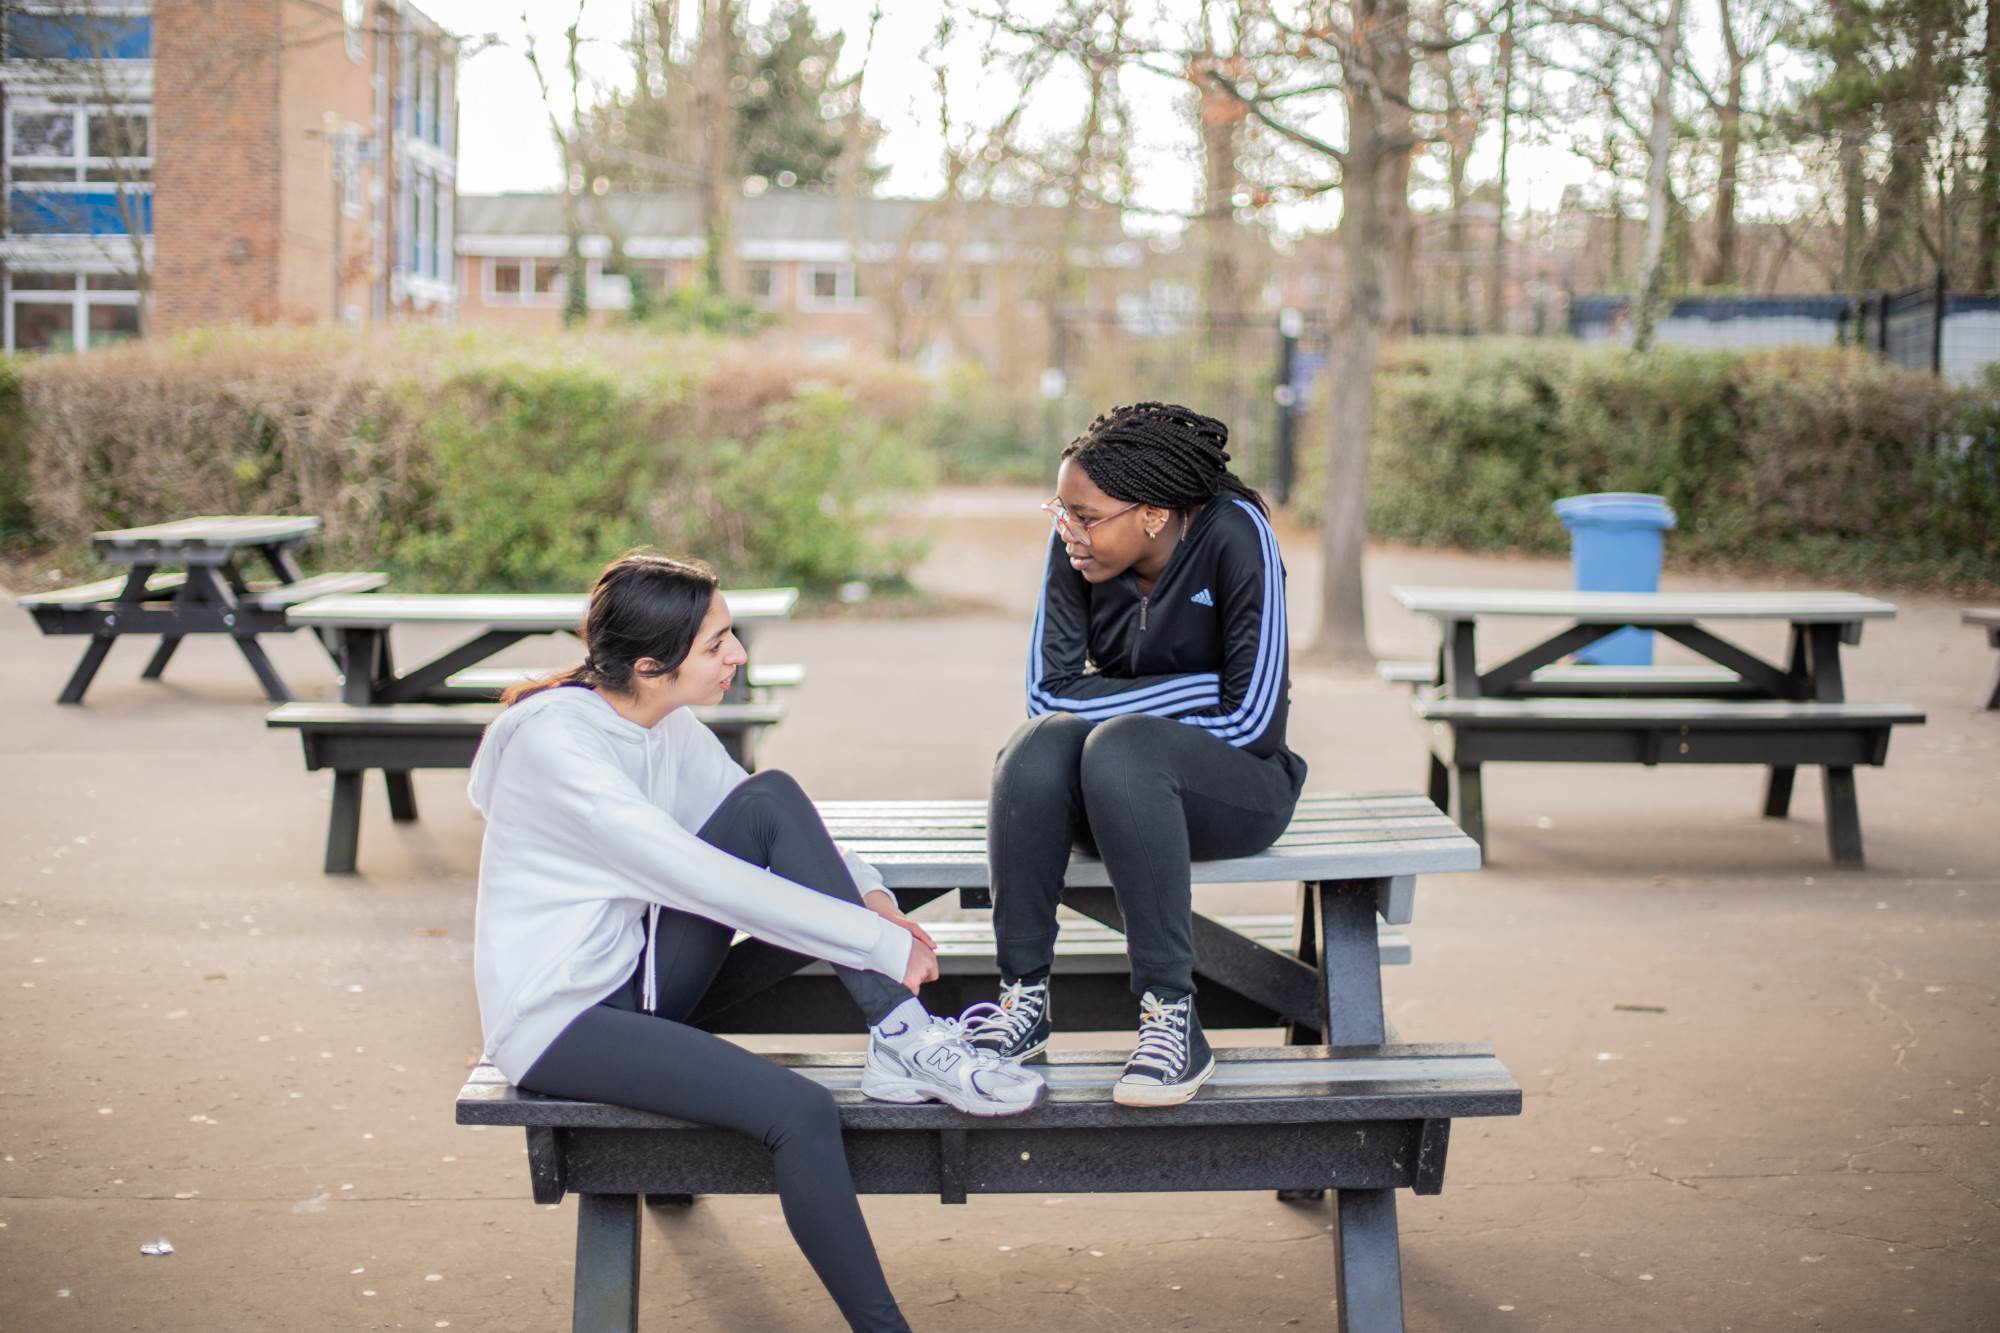  Young People Chatting On Picnic Benches